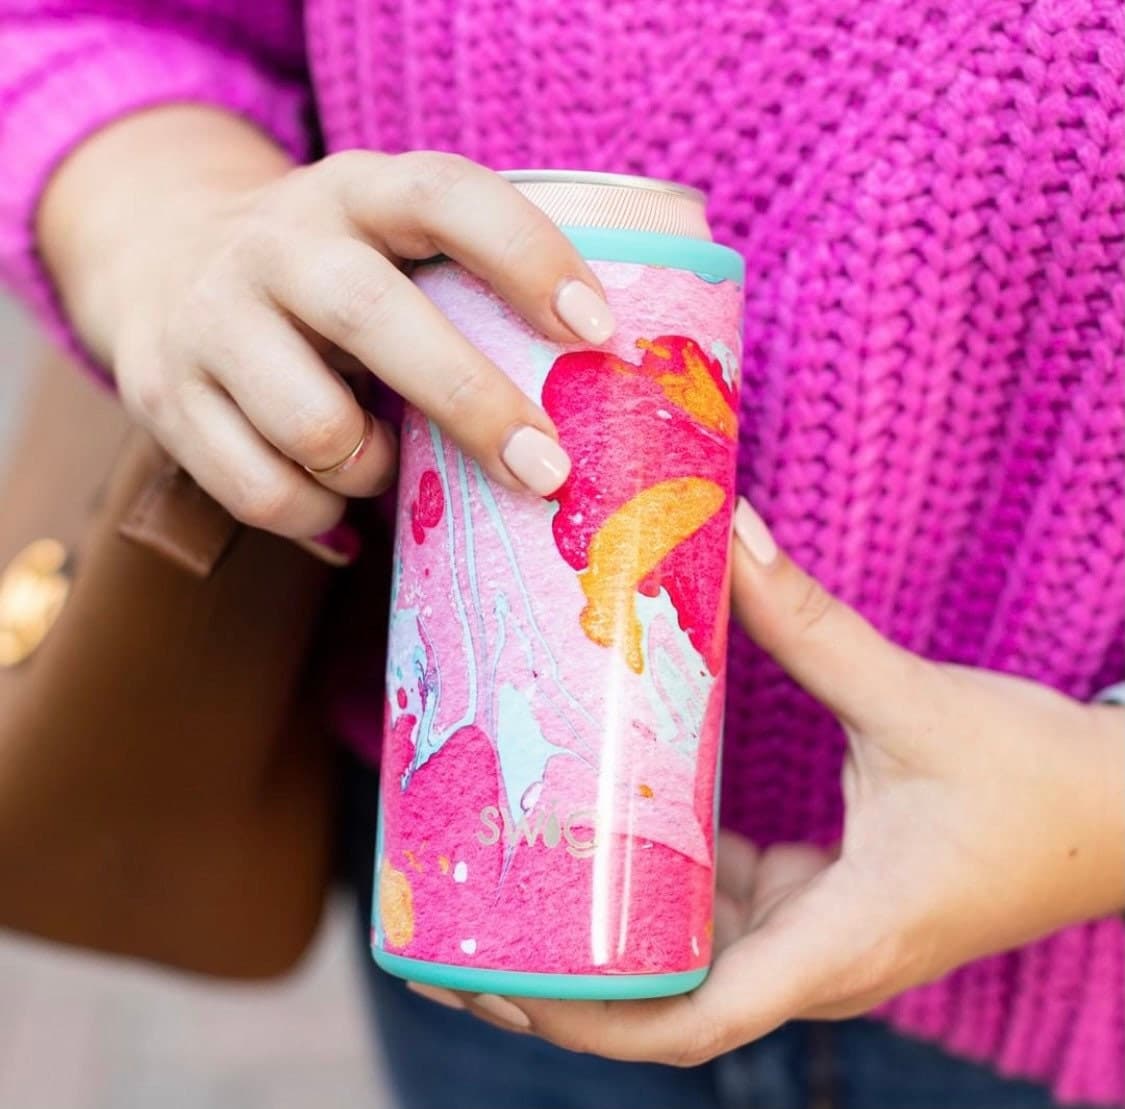 SWIG Cotton Candy Print Slim Can Cooler | SWIG Combo - CeCe's Home & Gifts